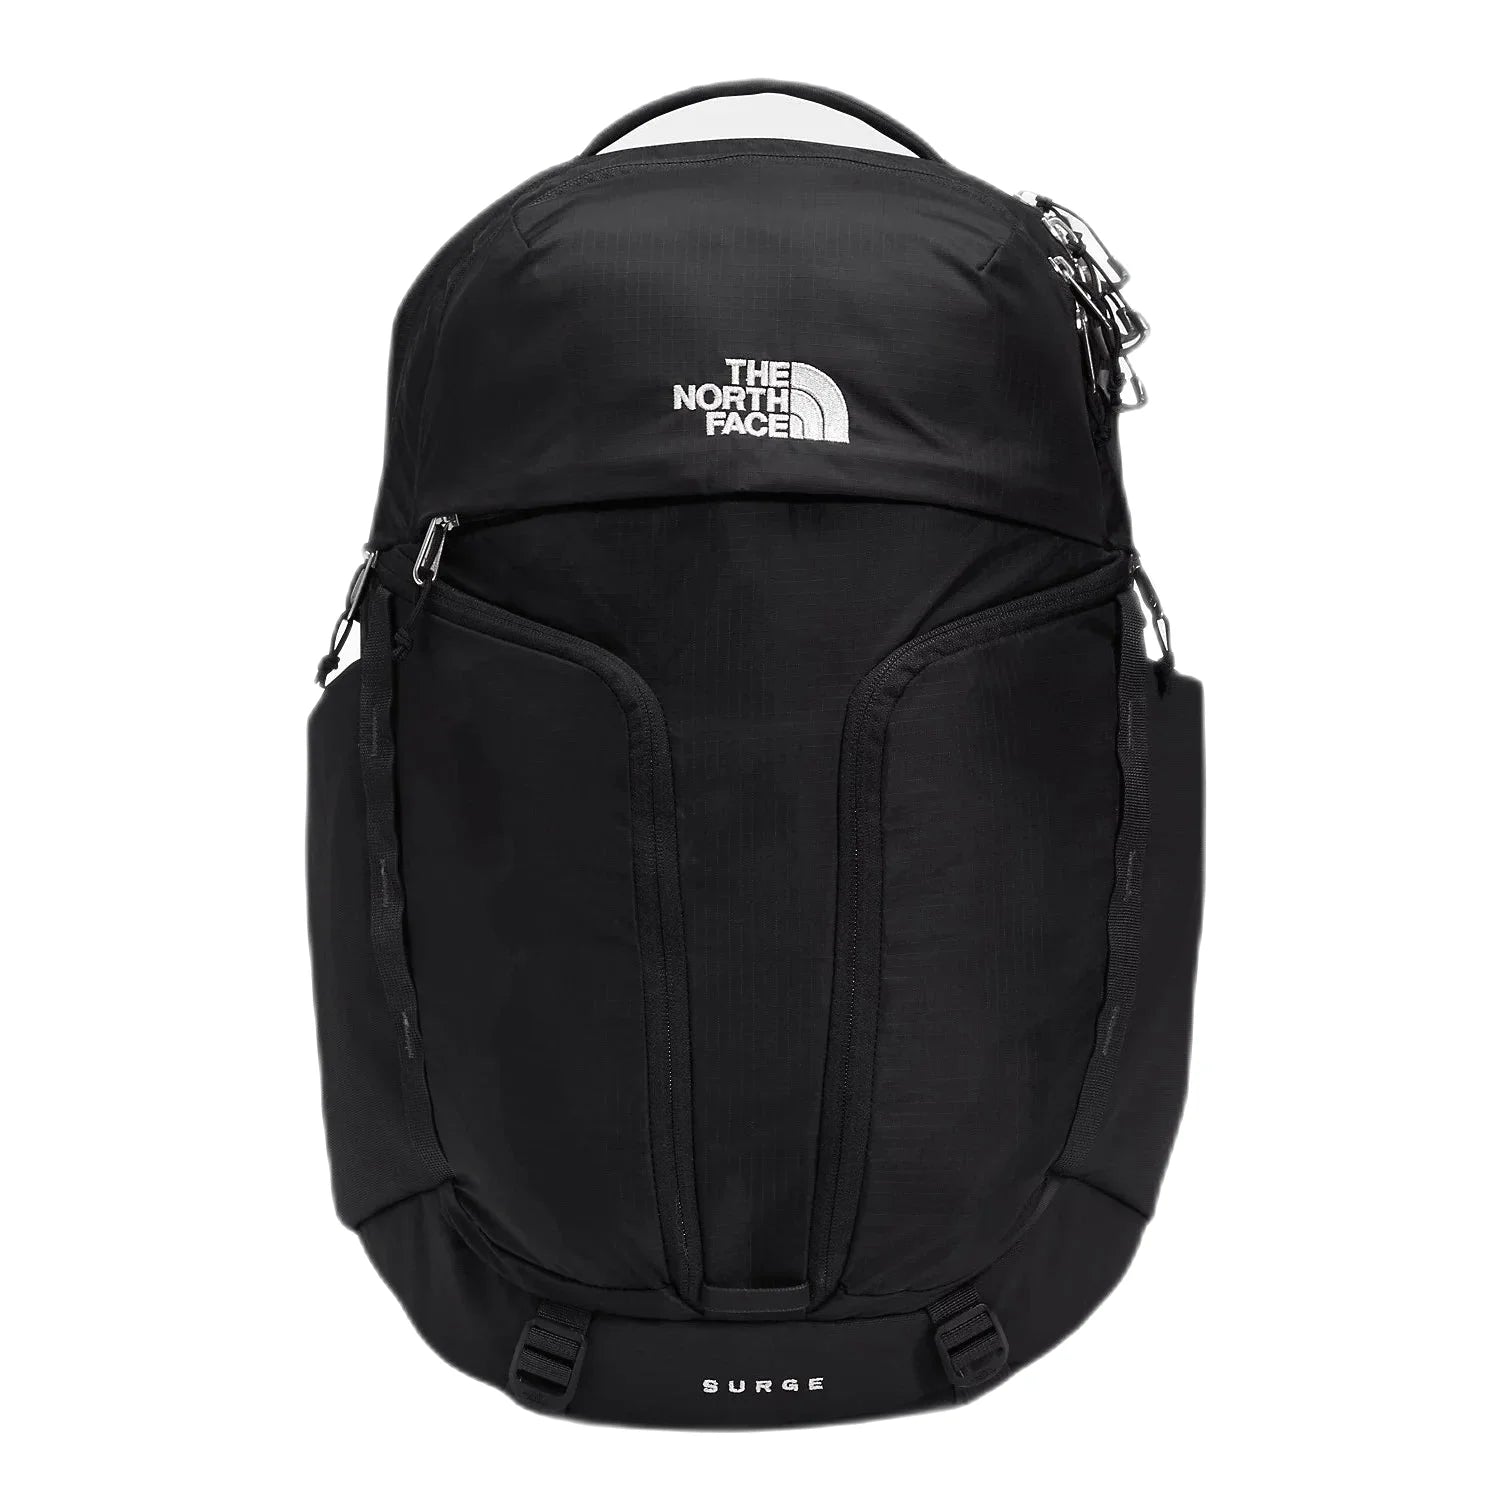 The North Face Women's Surge Backpack TNF Black/Black Front